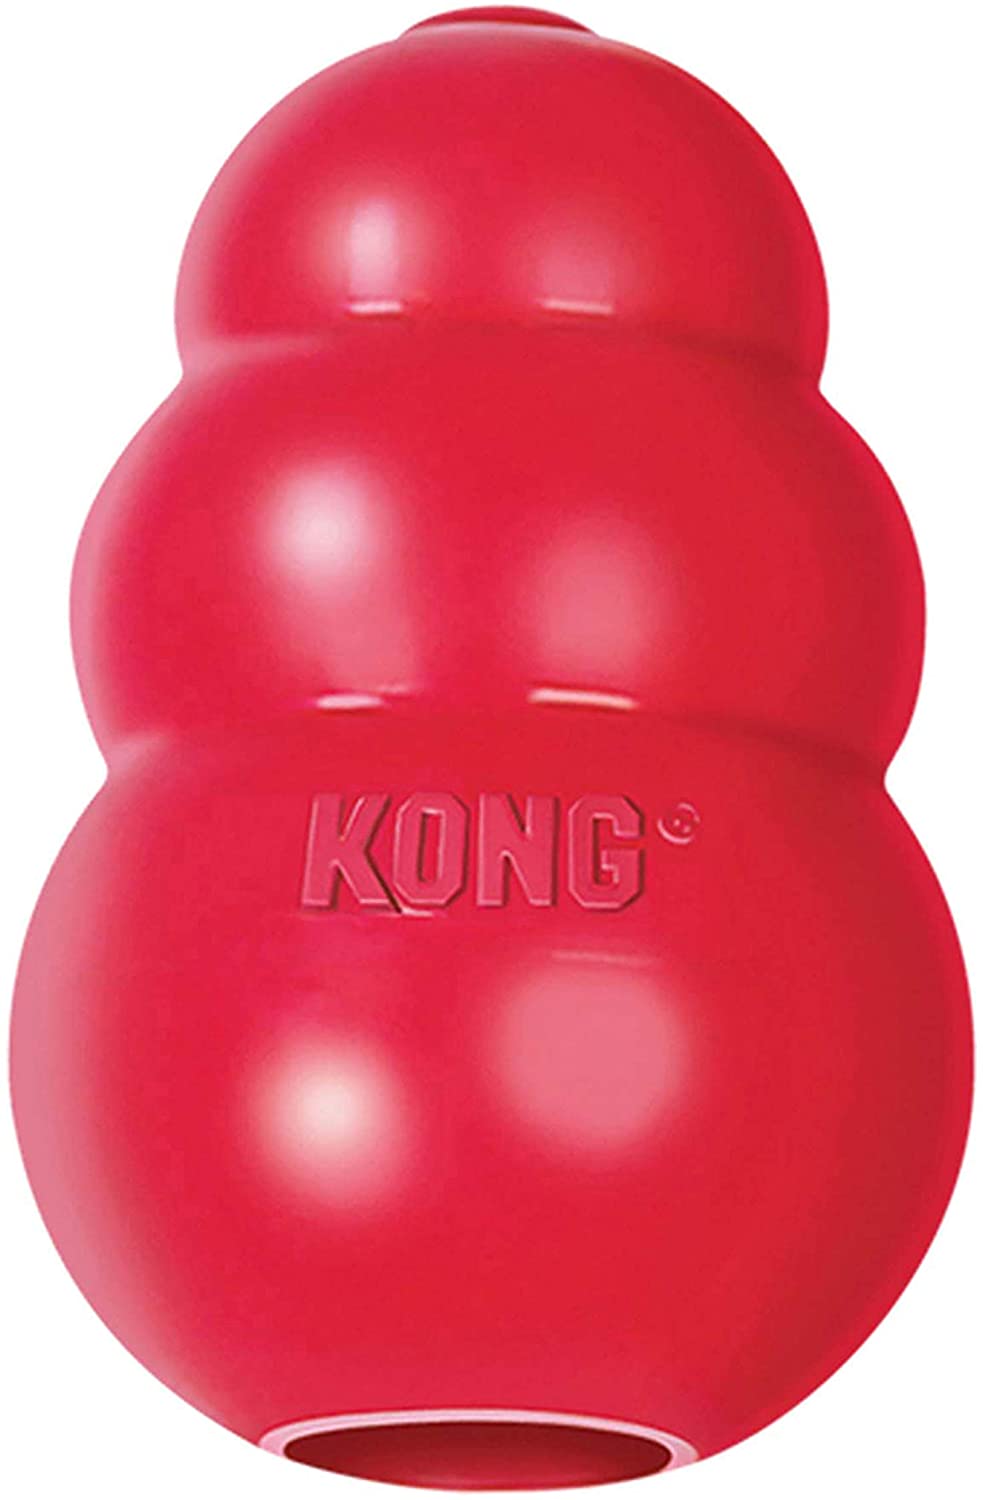 KONG Classic Dog Toy, Durable Natural Rubber / RO NVbN fu i`o[ p  [bh] [MTCY]